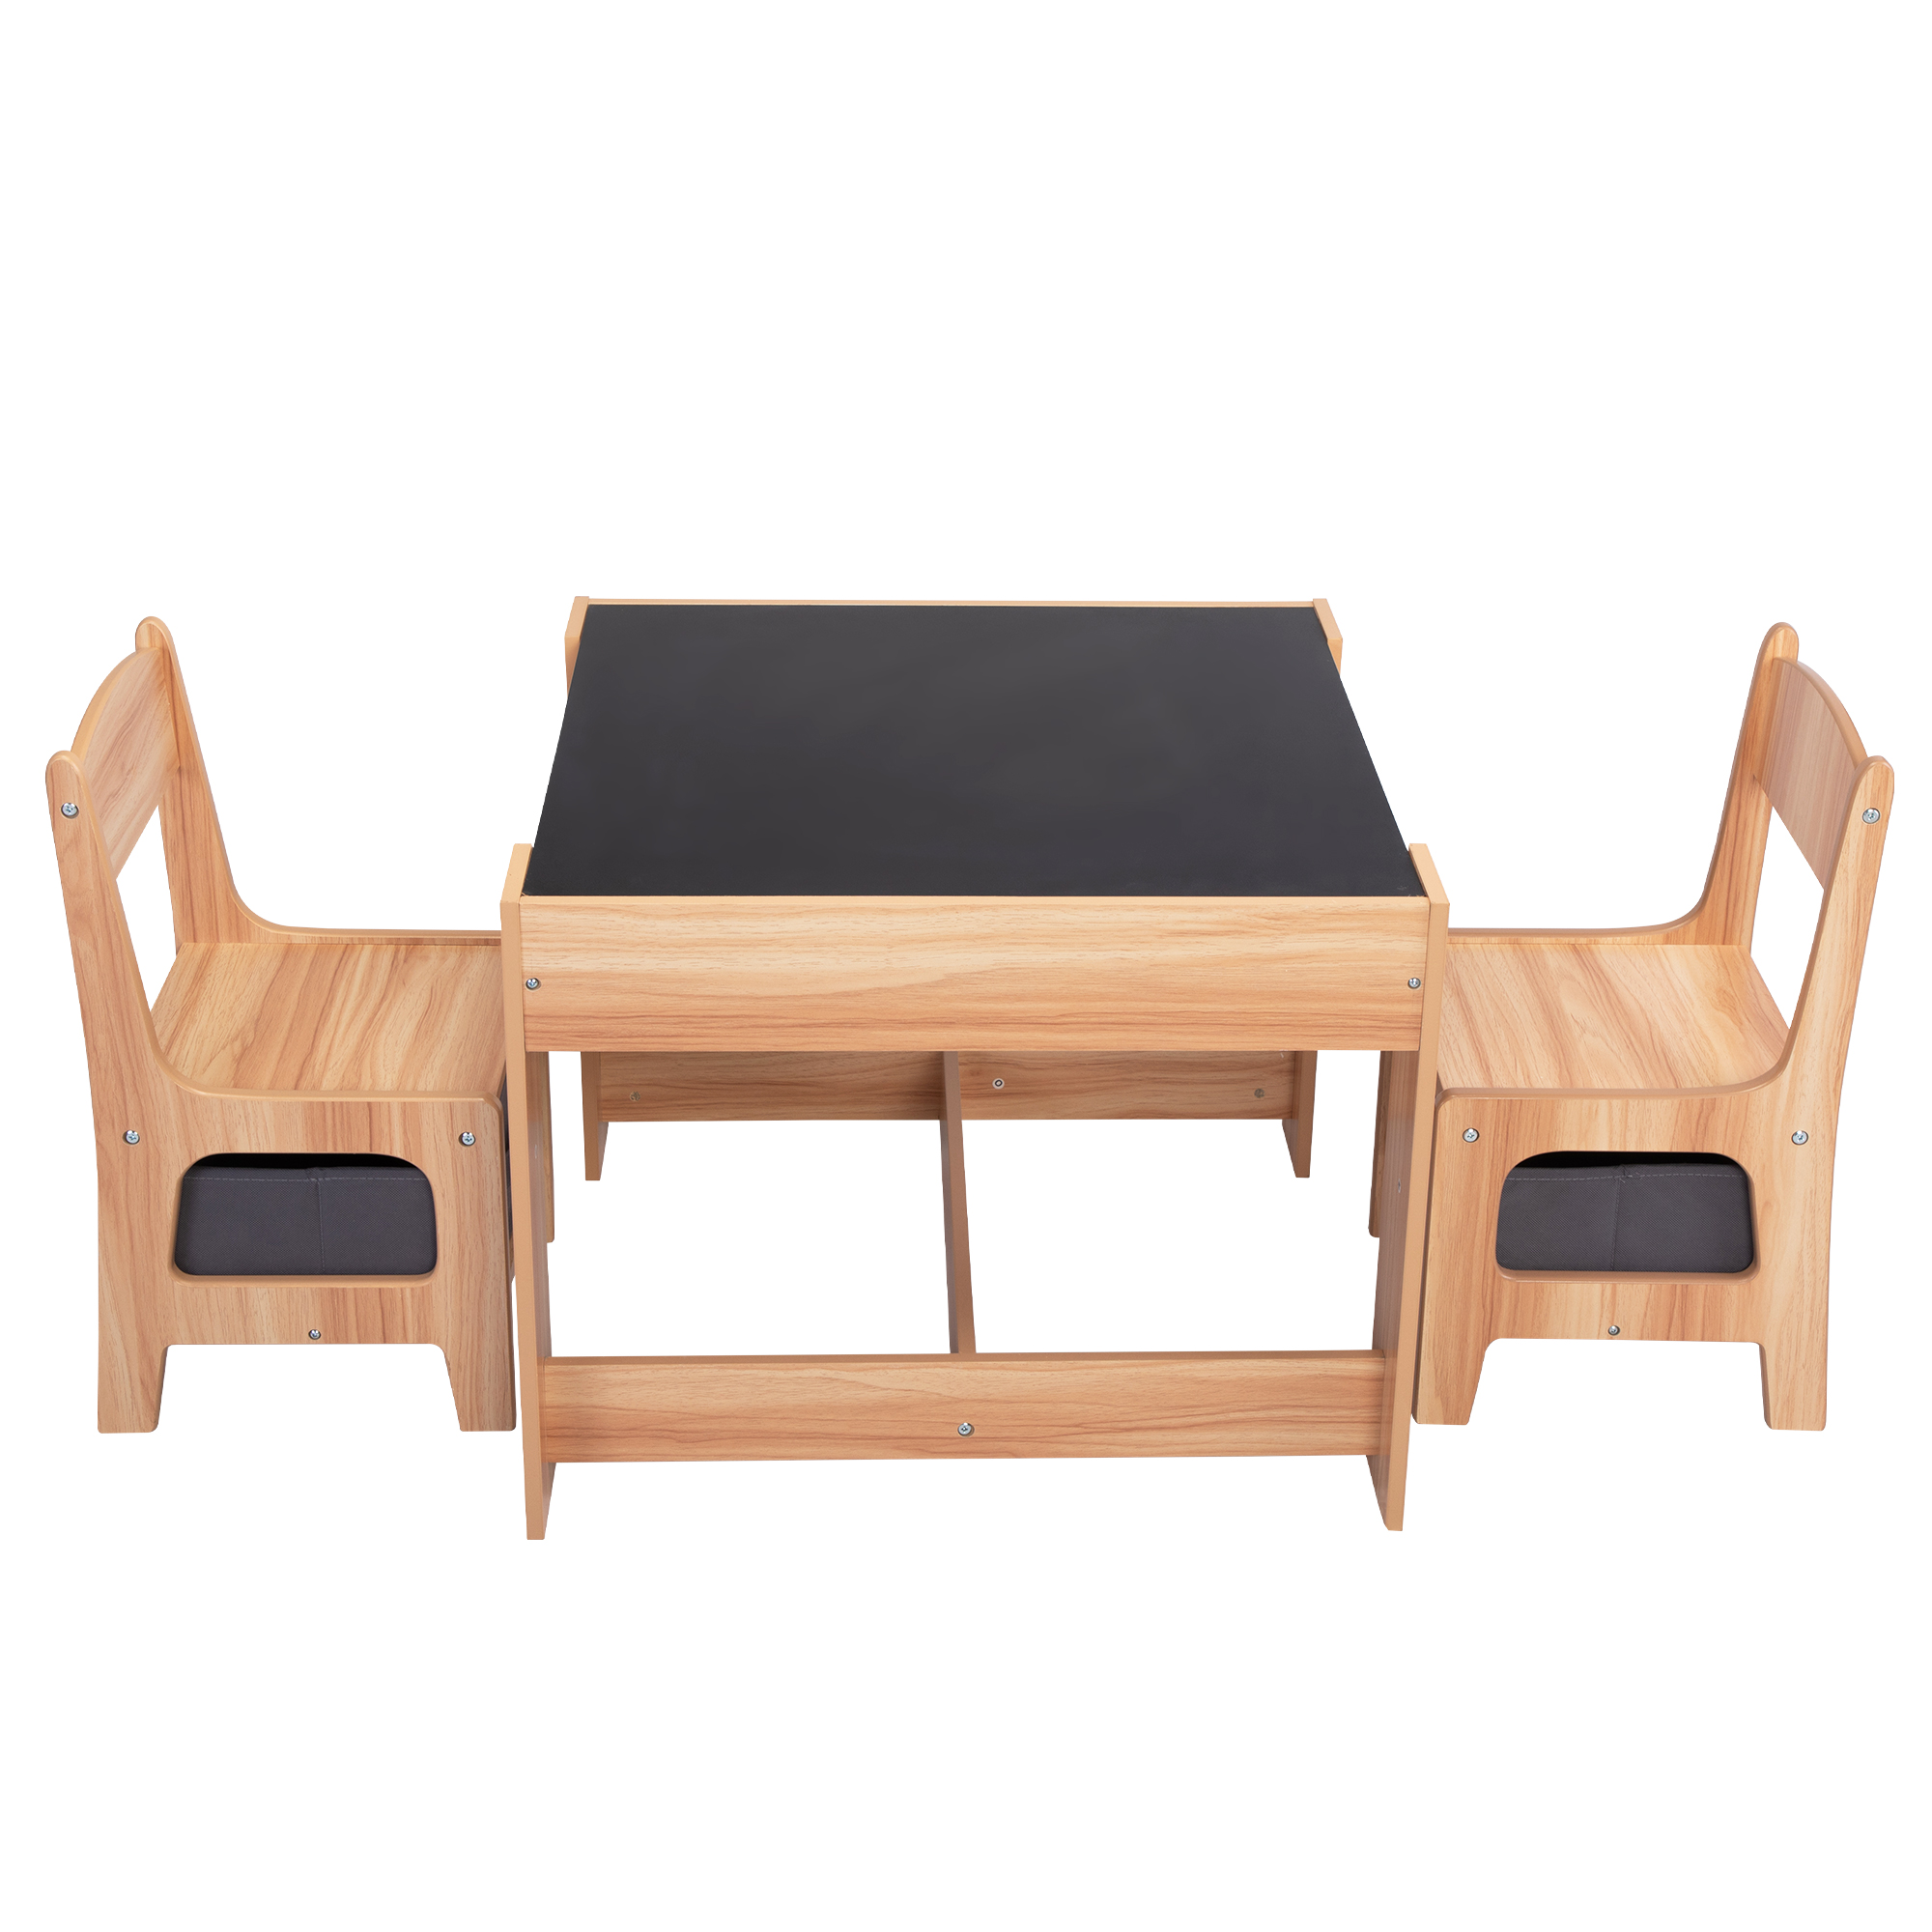 3-in-1 Kids Wood Table and 2 Chairs, Children Activity Table Set with Storage, Blackboard, Double-Sided Table for Drawing,Natural